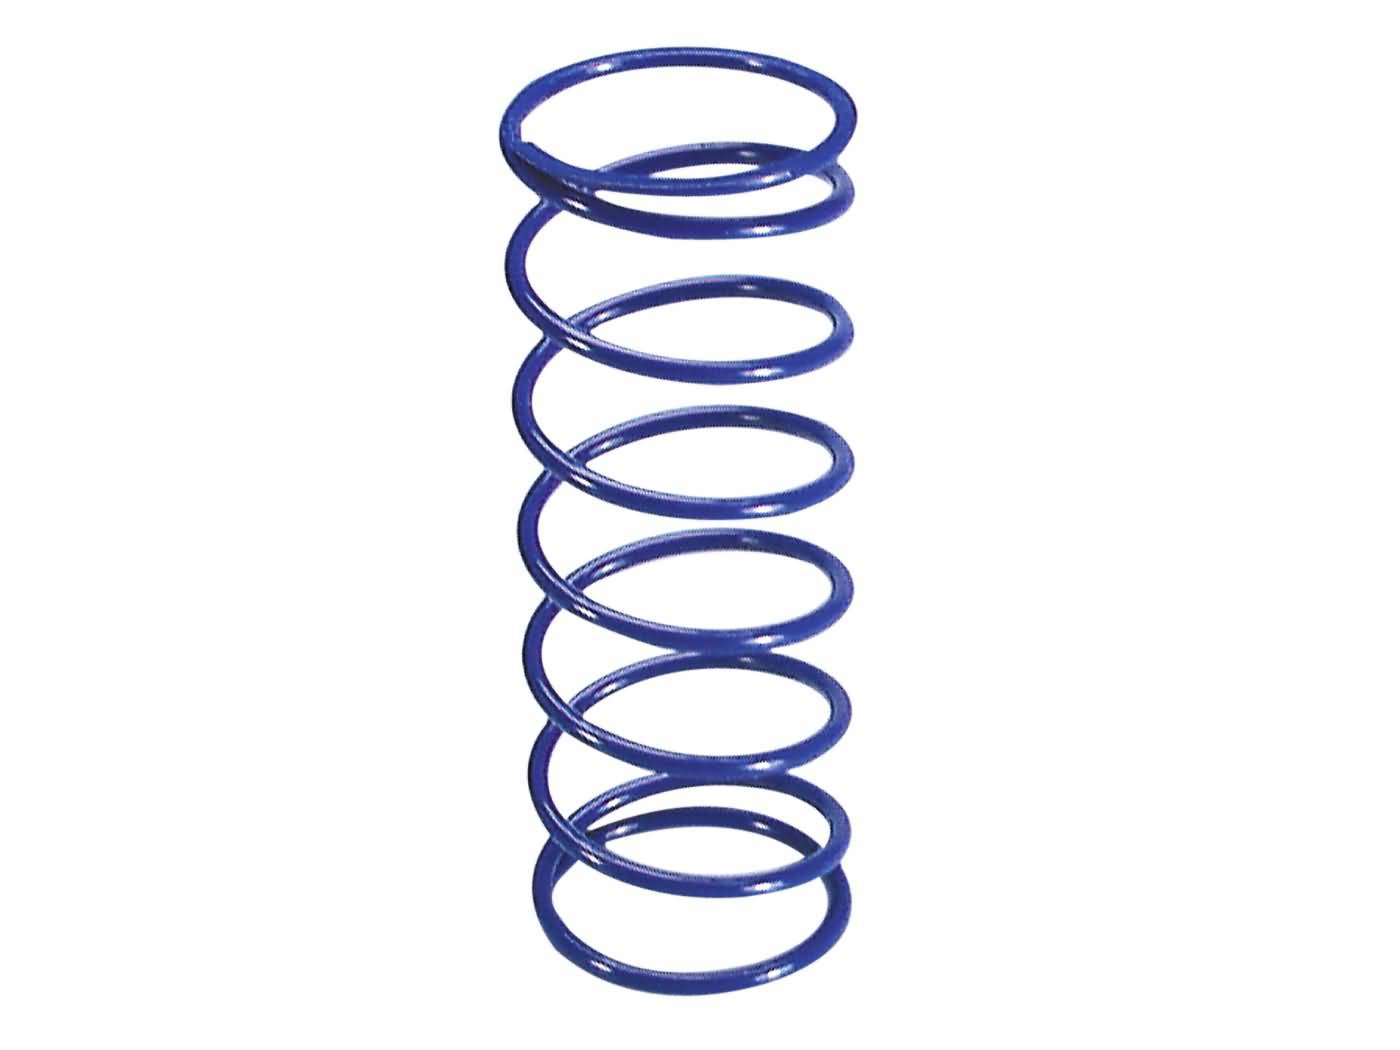 Polini torque spring+15% for Honda 250 -1998, Kymco Grand Dink, People, Xciting 250